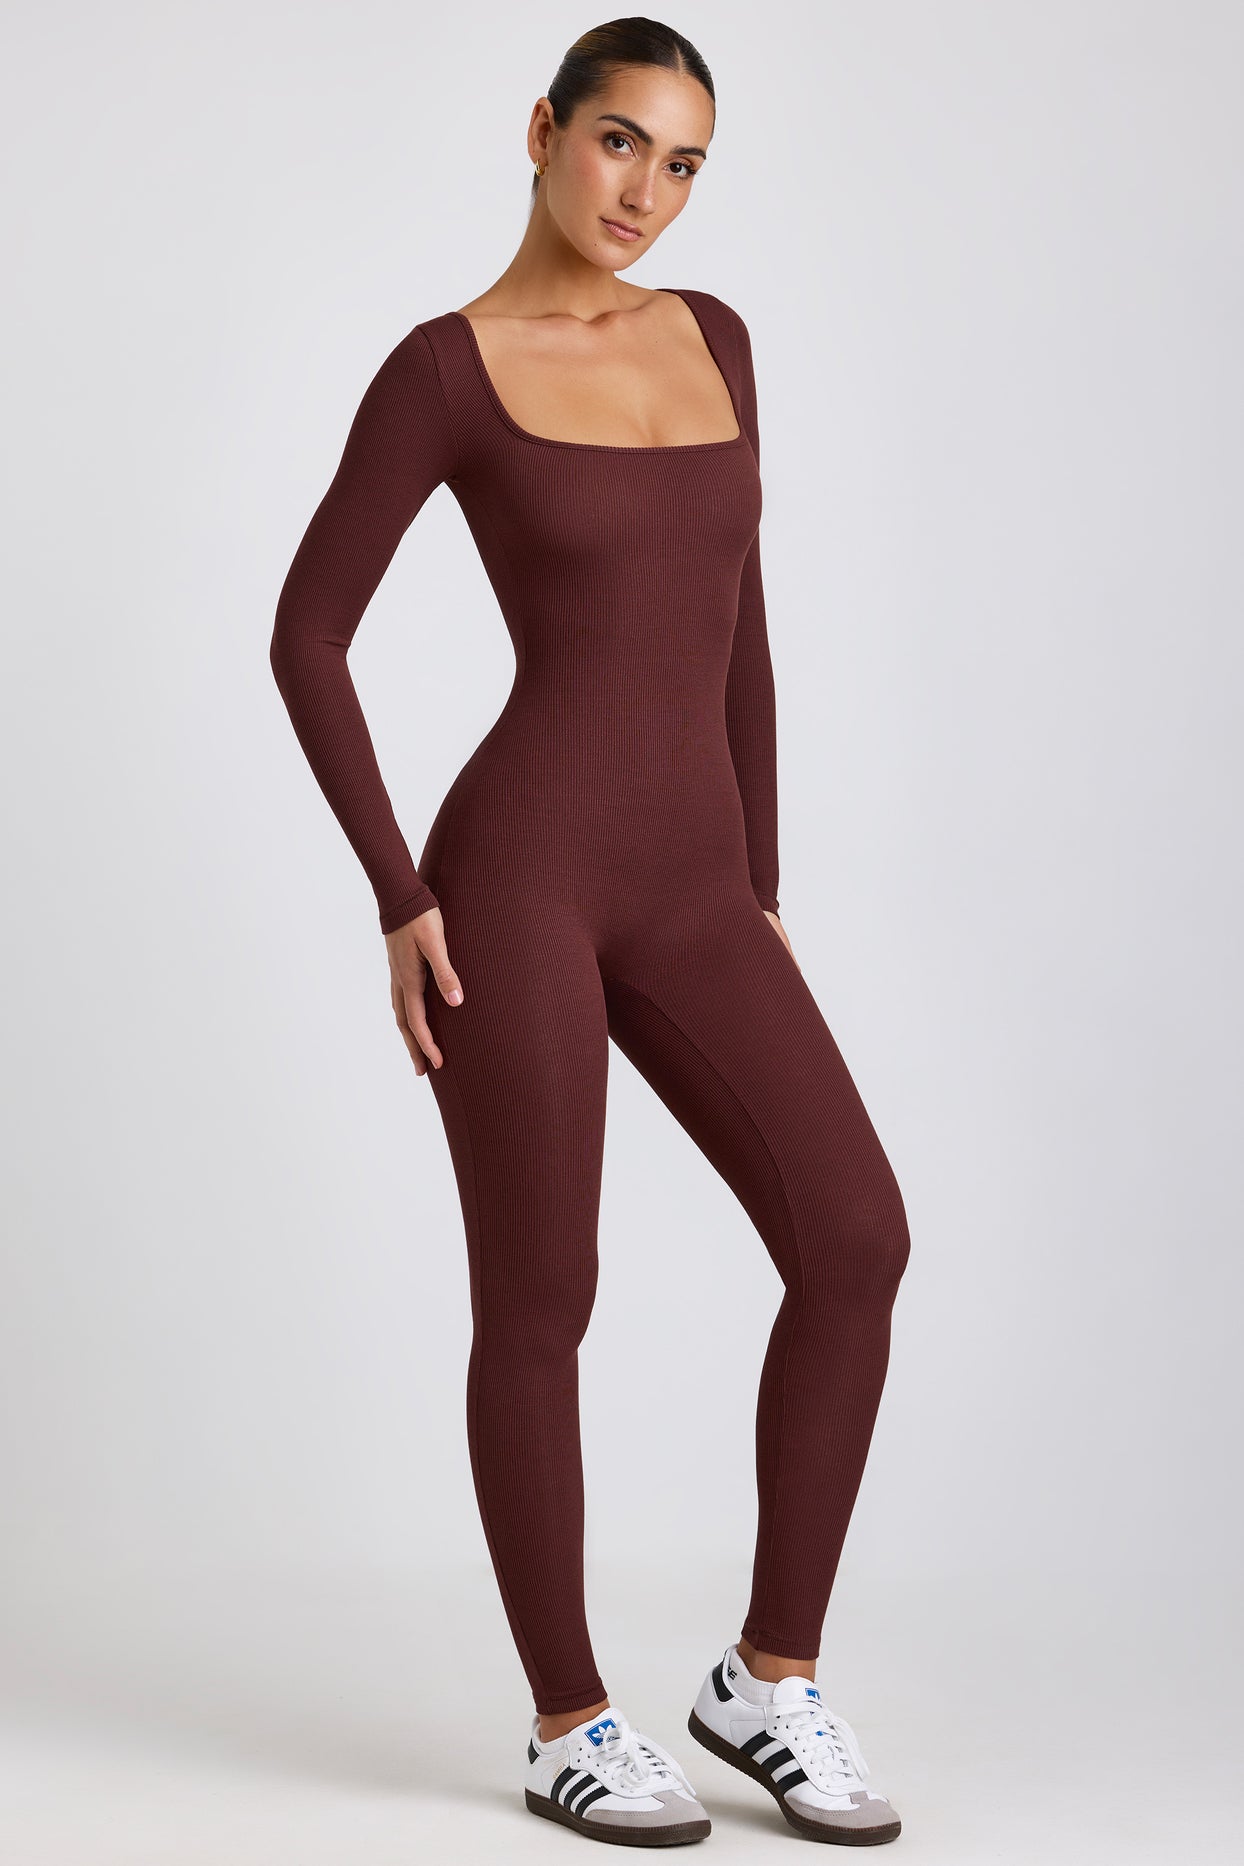 Ribbed Modal Long Sleeve Jumpsuit in Espresso